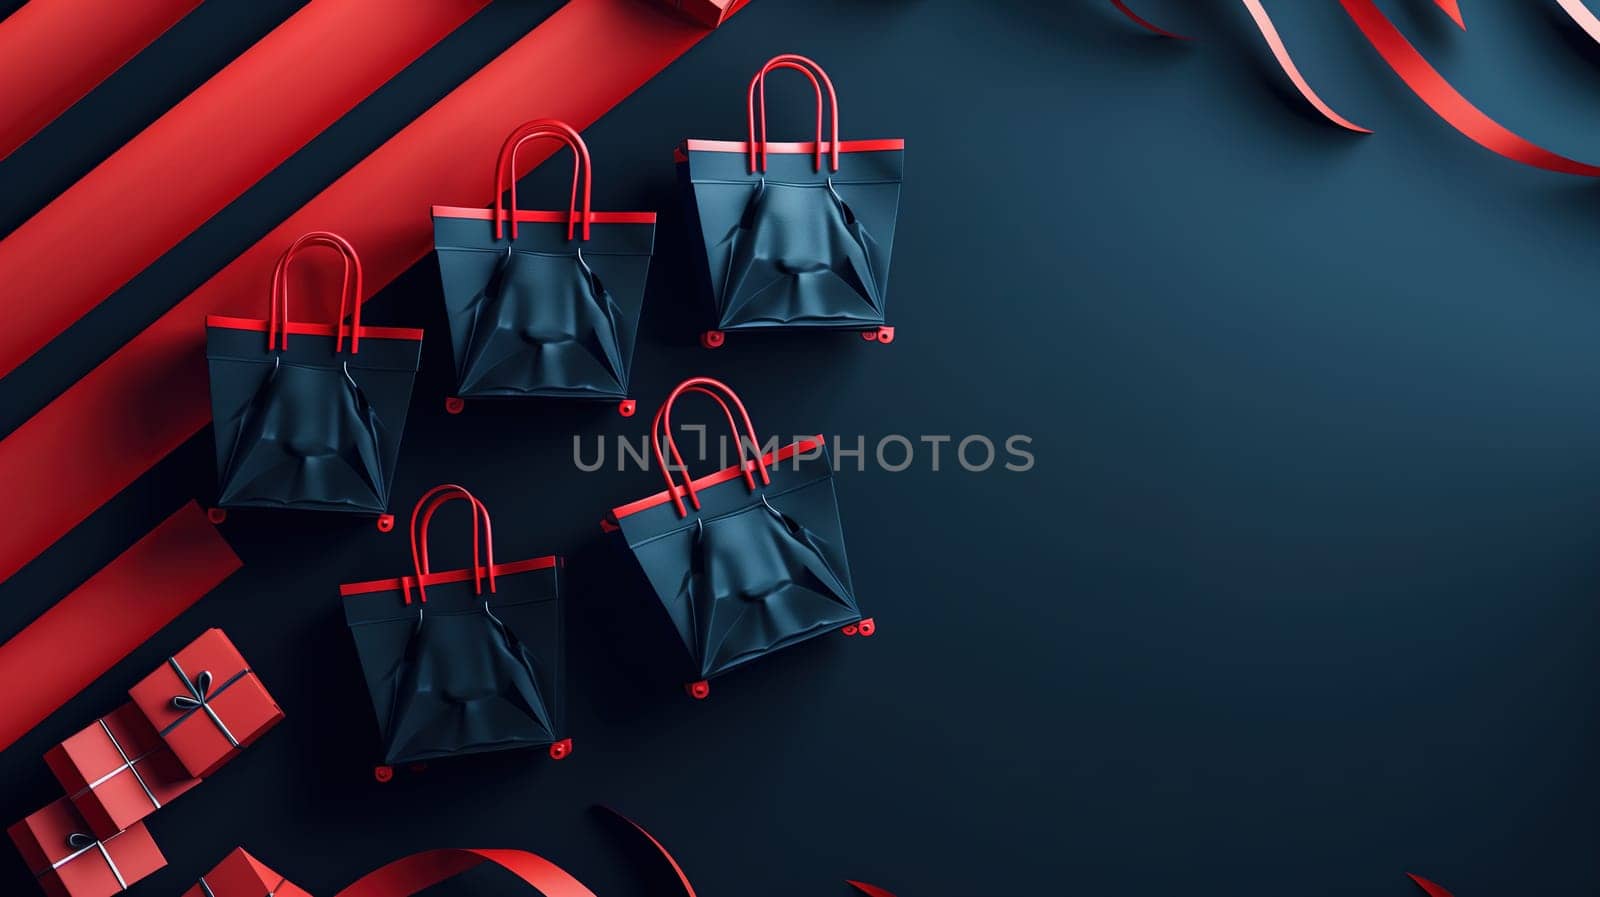 Several black bags with red ribbons tied around them, likely indicating a special sale or promotion. The bags are neatly arranged in a group, showcasing the products for potential customers.